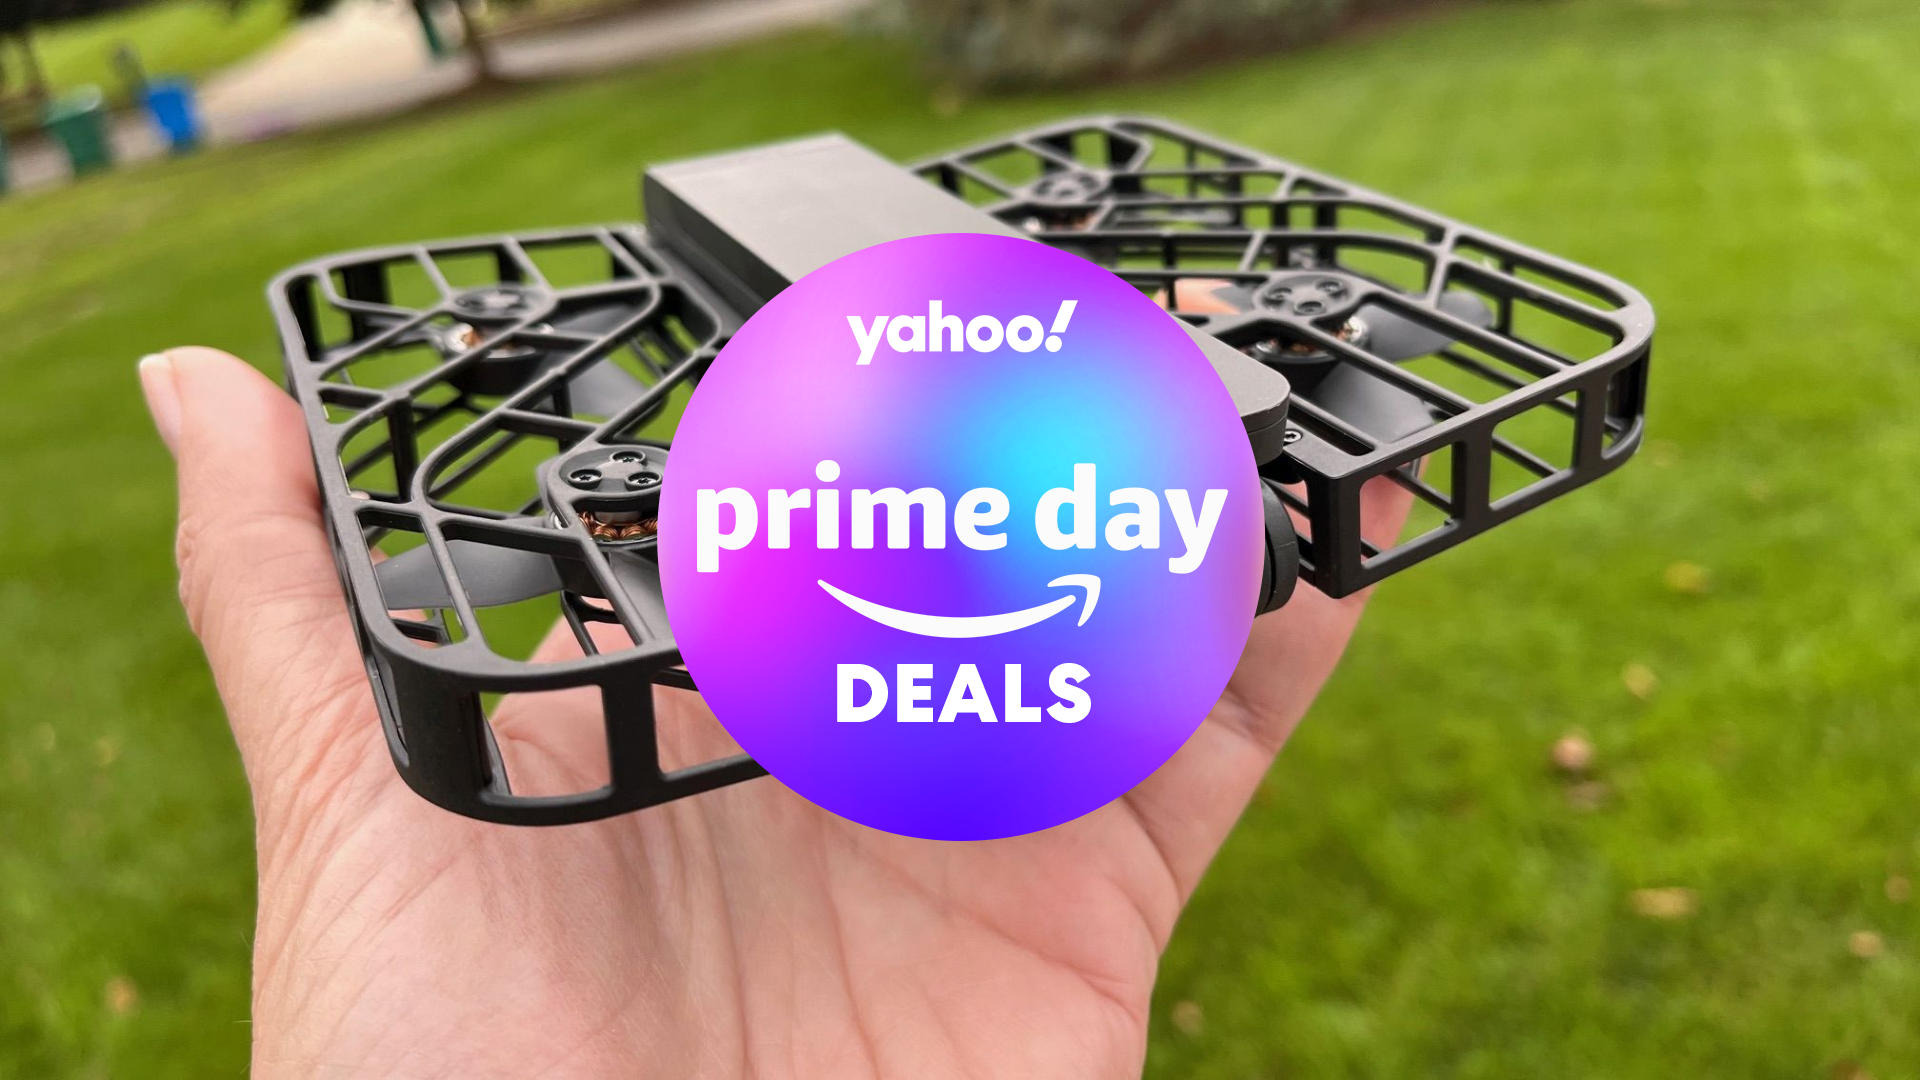 My favorite selfie drone of all time dropped to a record-low price for Prime Day: Save $120